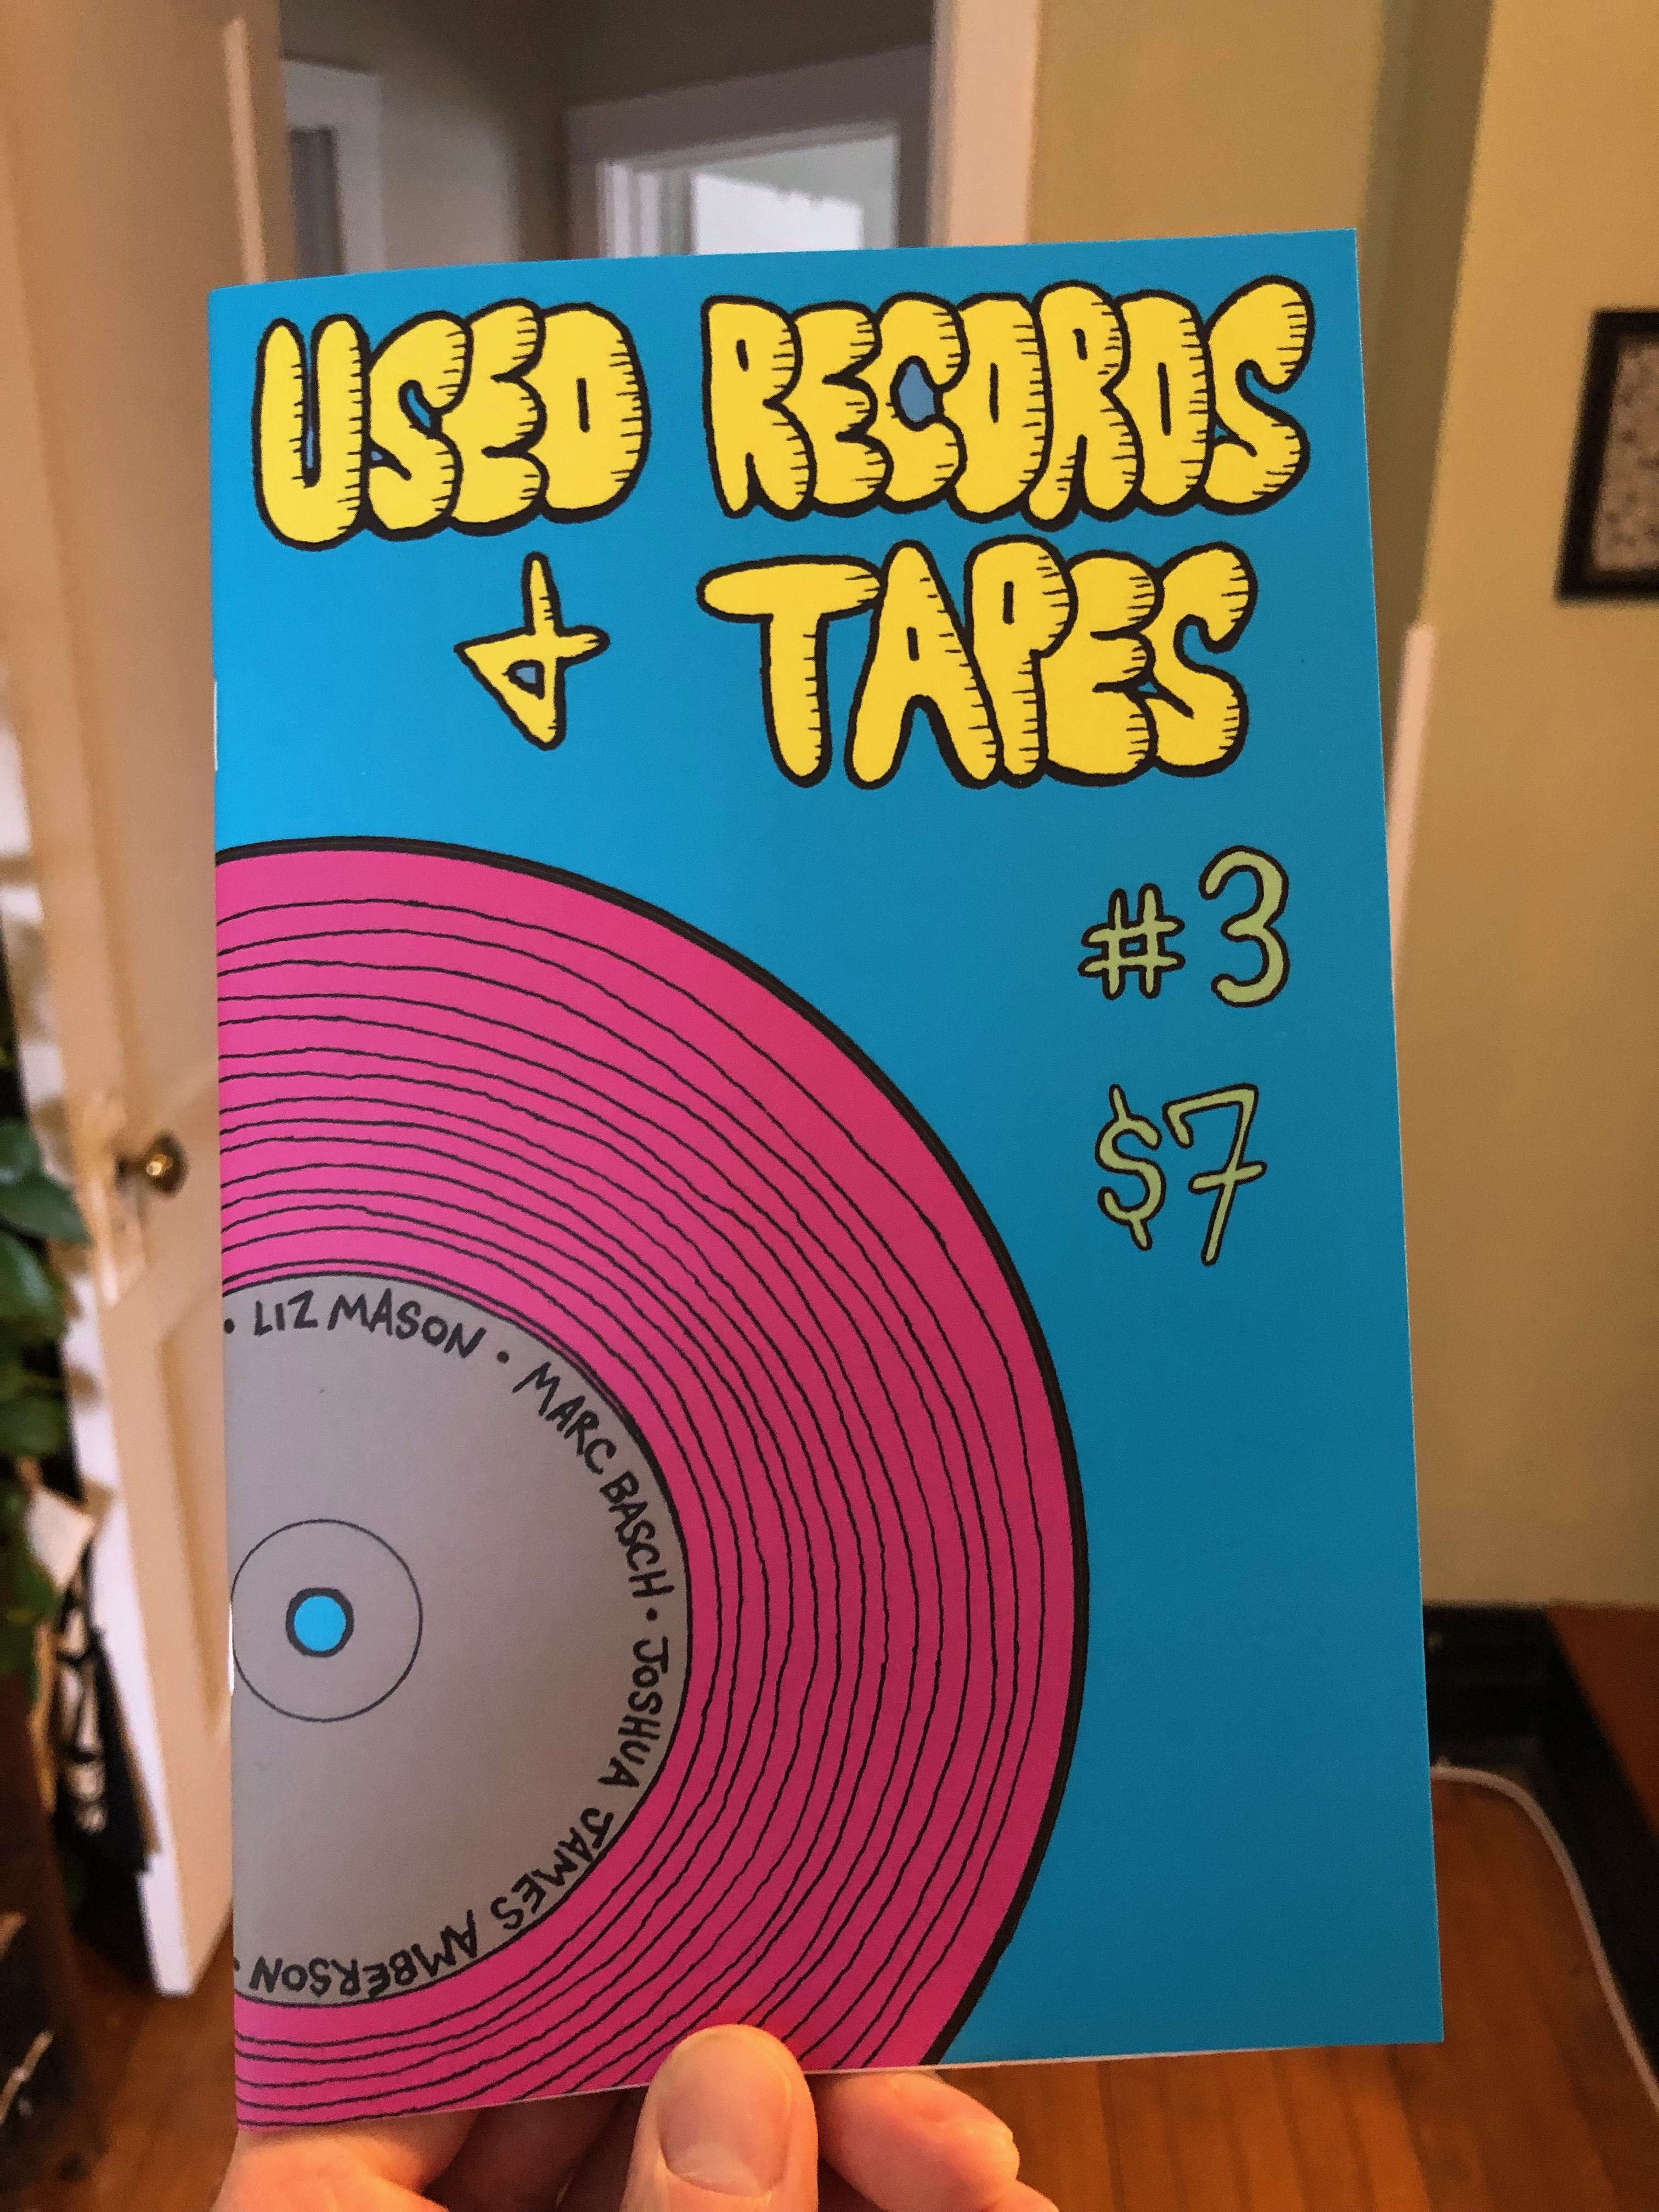 Used Records & Tapes #3